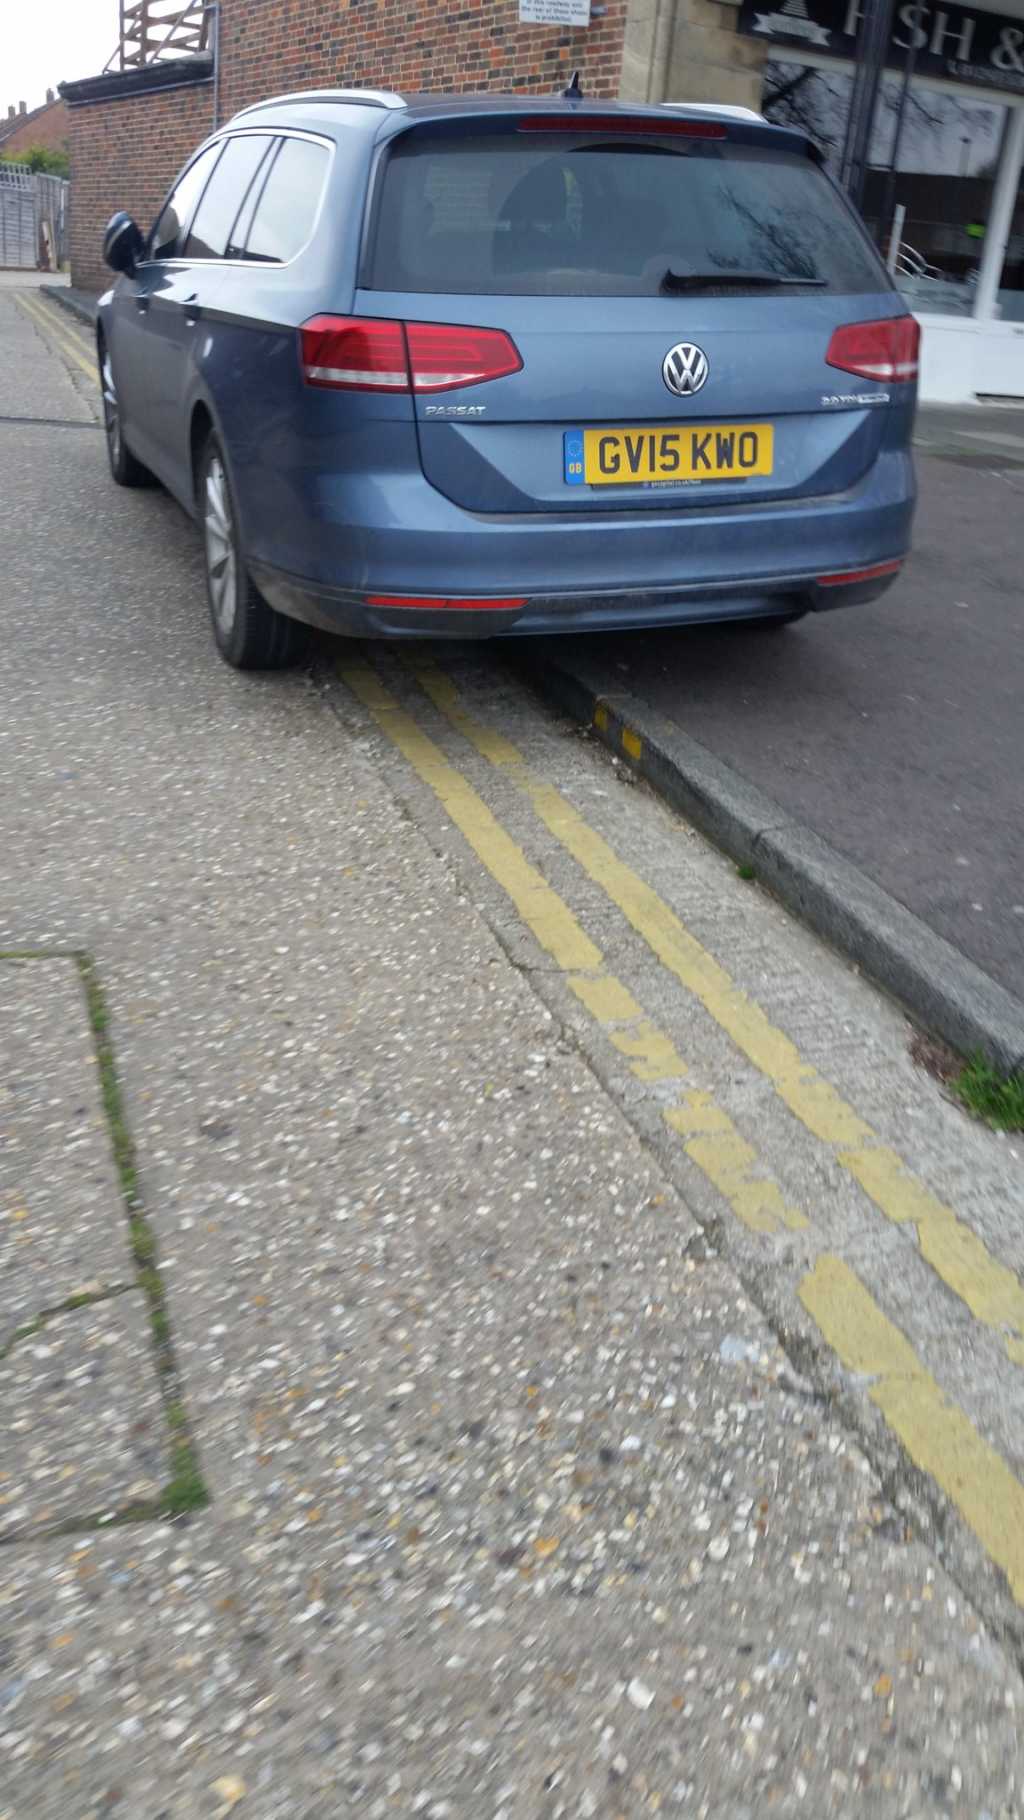 GV15 KWO is a crap parker